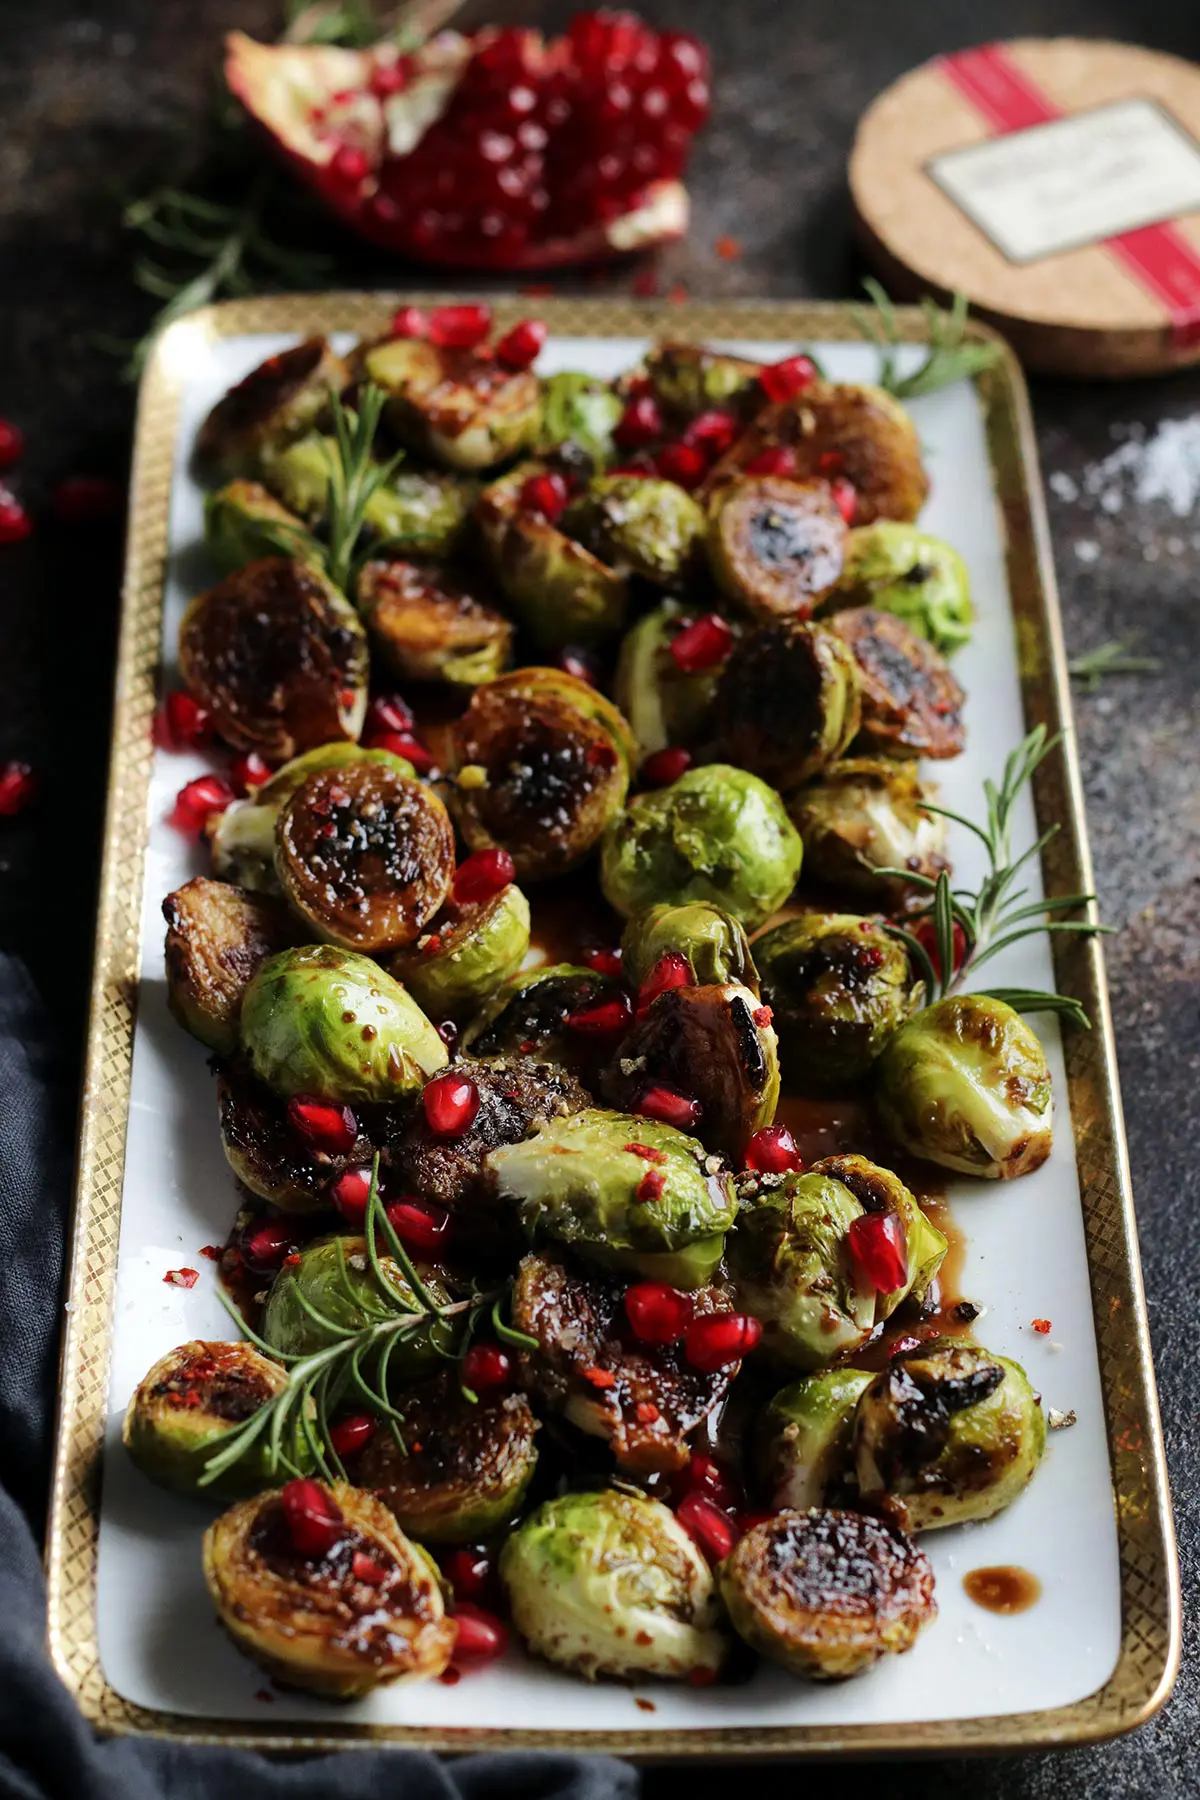 A Serving Dish with Brussels Sprouts.